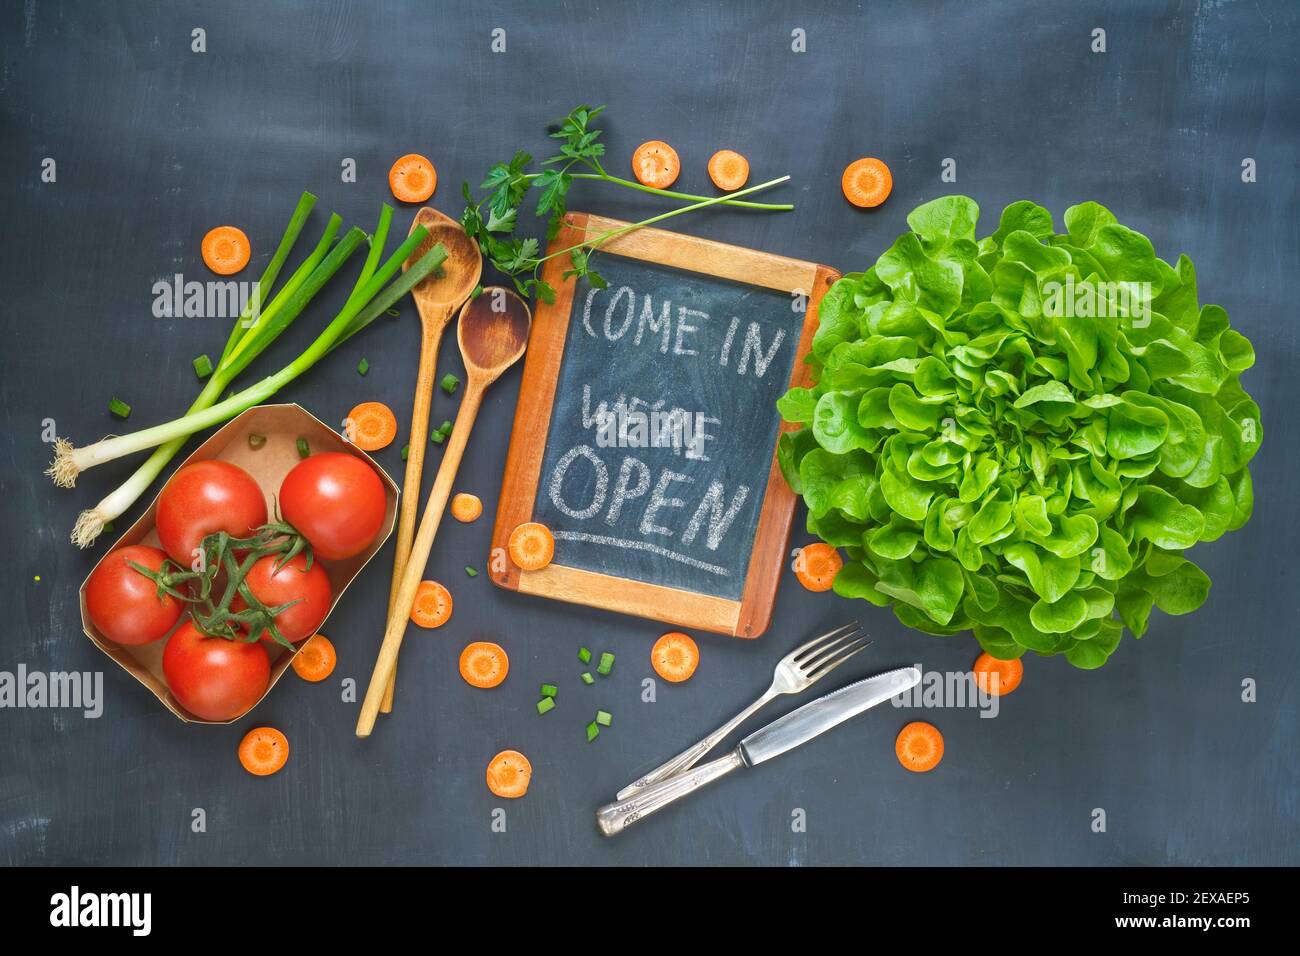 reopen sign, restaurant ready to service after corona lockdown, food ingrdients kitchen utensils and message on blackboard,flat lay Stock Photo